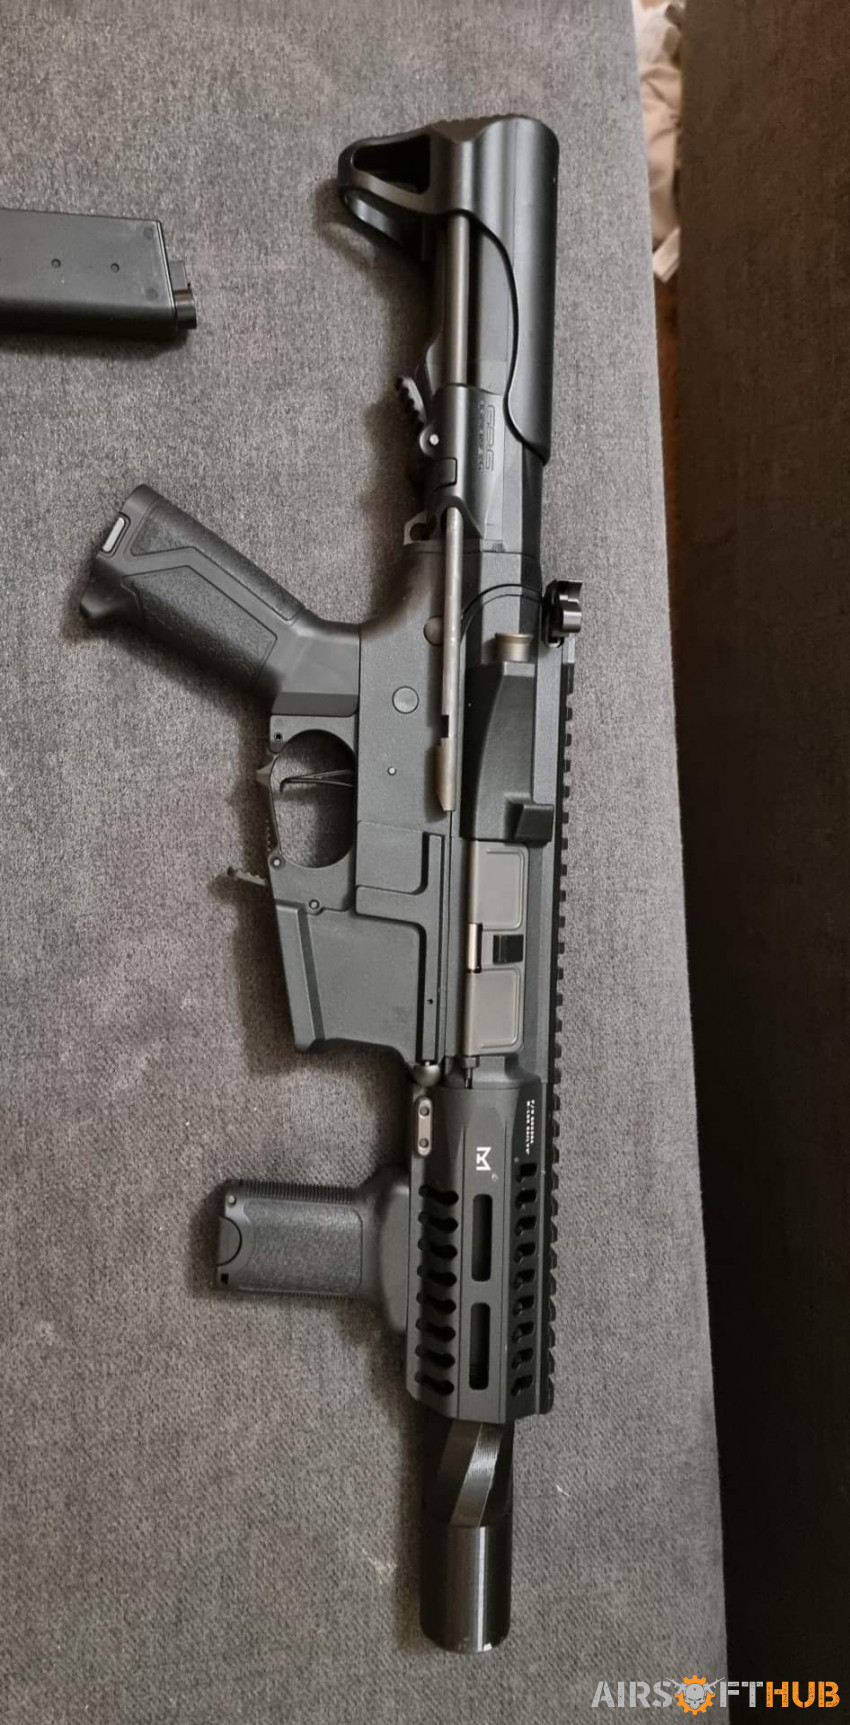 Arp9  with 4 magazines - Used airsoft equipment